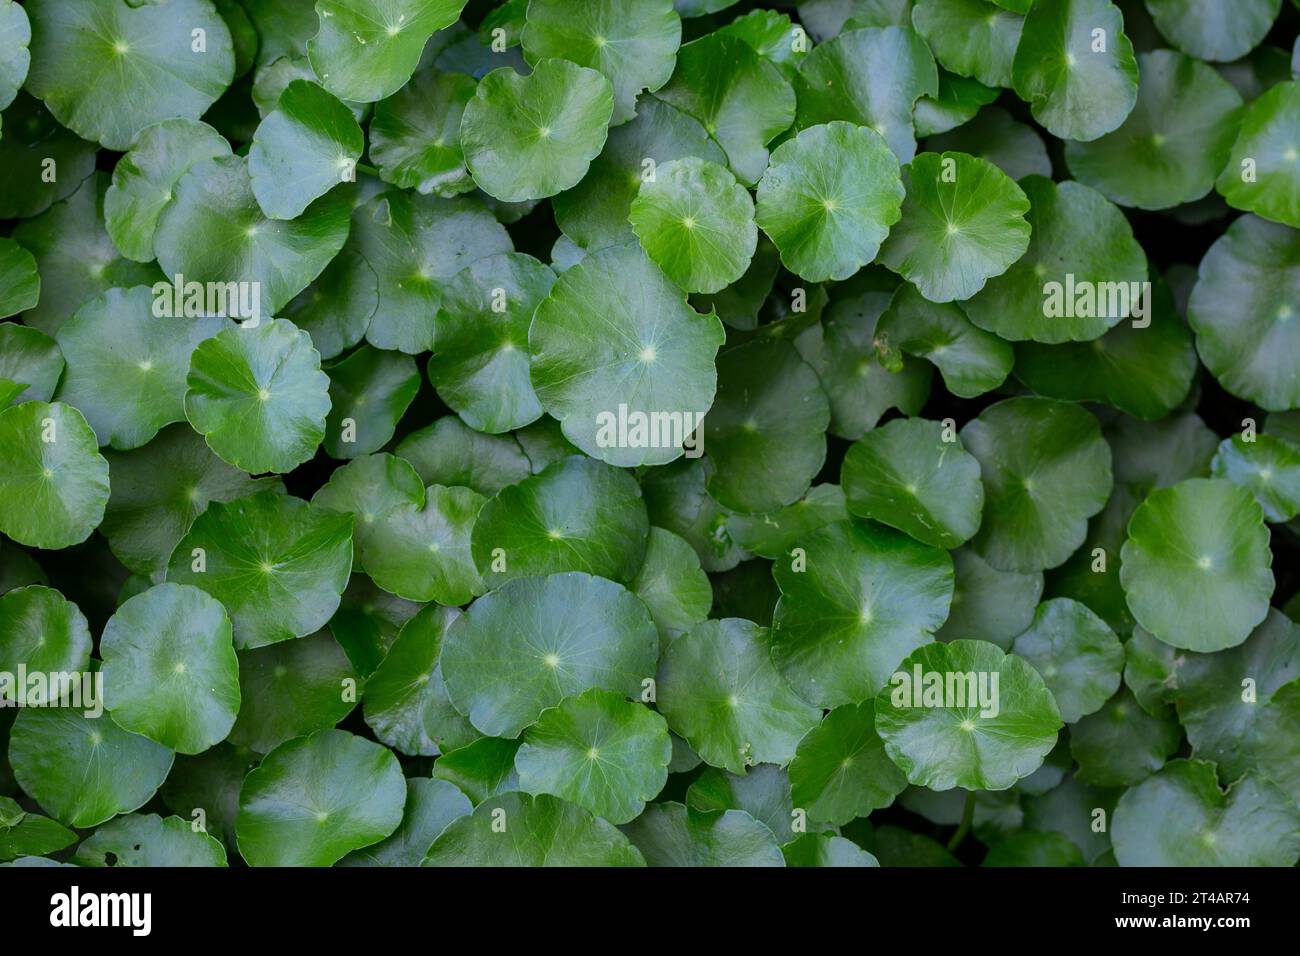 Top view of round green leaves Stock Photo